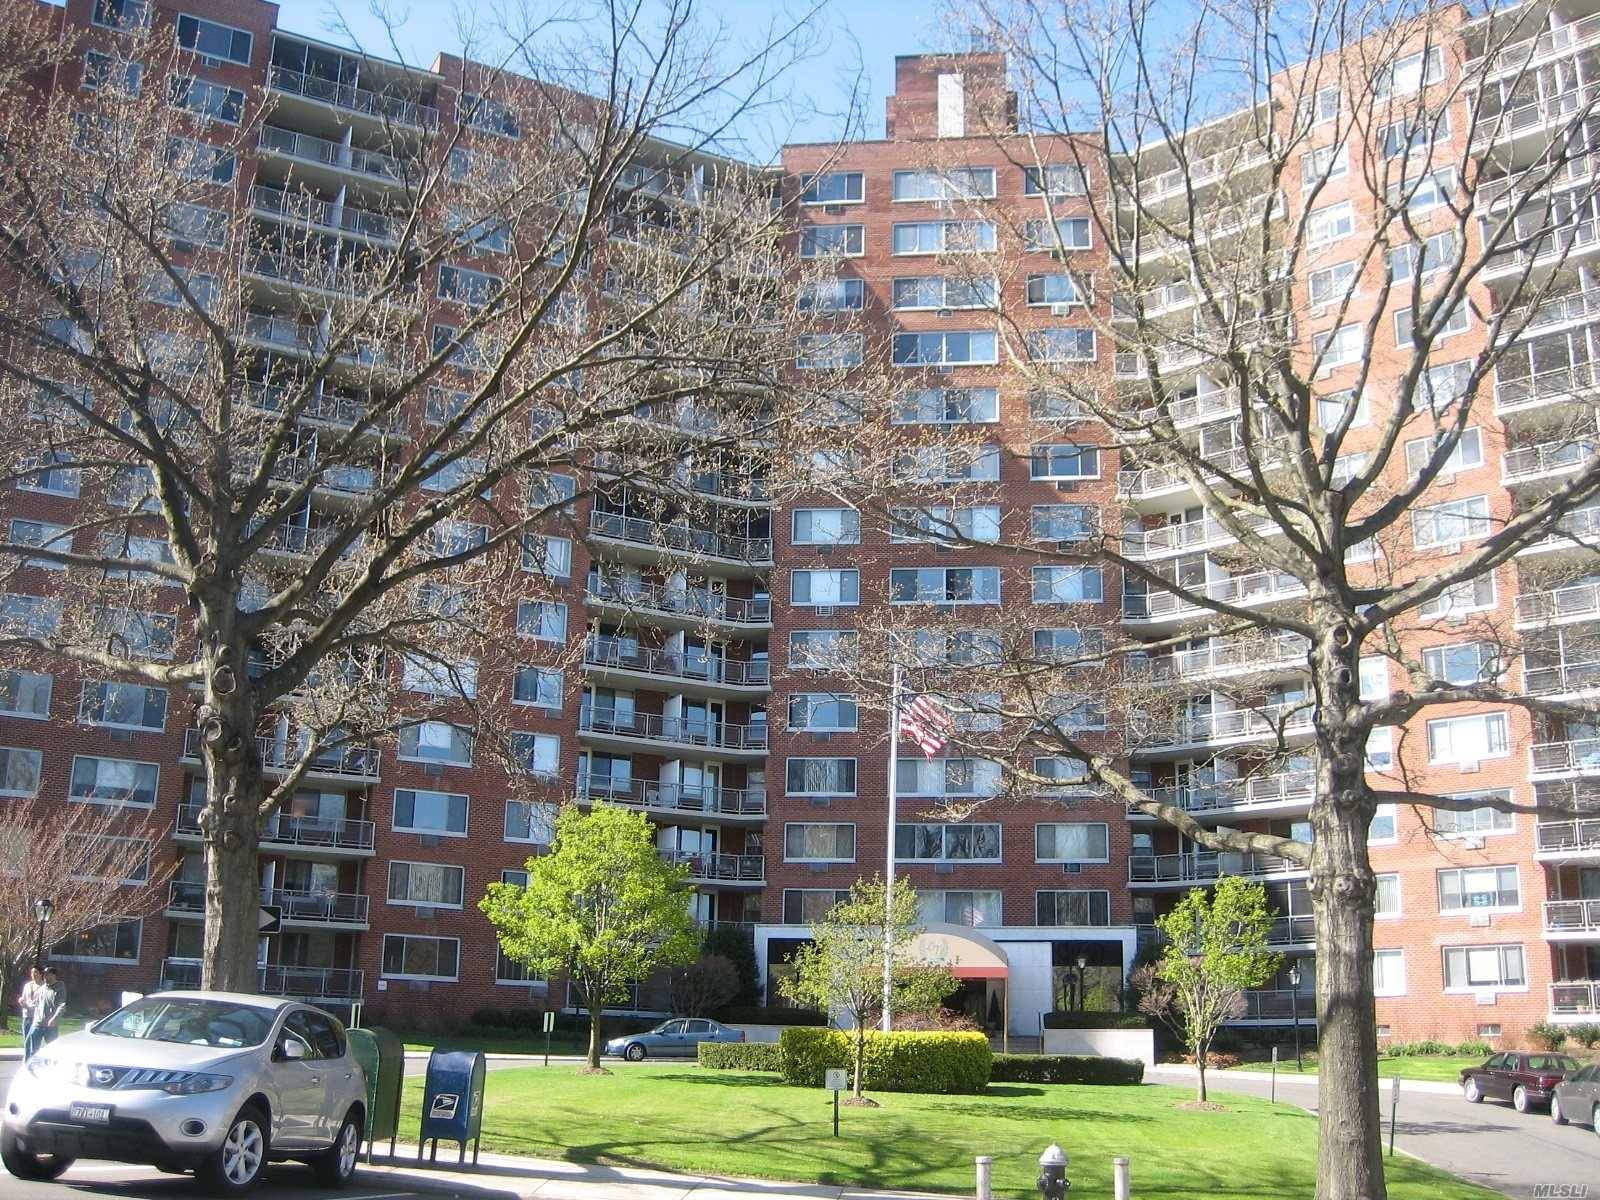 Deluxe CO OP Bldg. Large JR4 2 Bedrooms, Eat in Kitchen w window, Bath,, Extra large Screened Terrace, Manhattan and Water Views, Close to Long Island Rail Road City Express ...